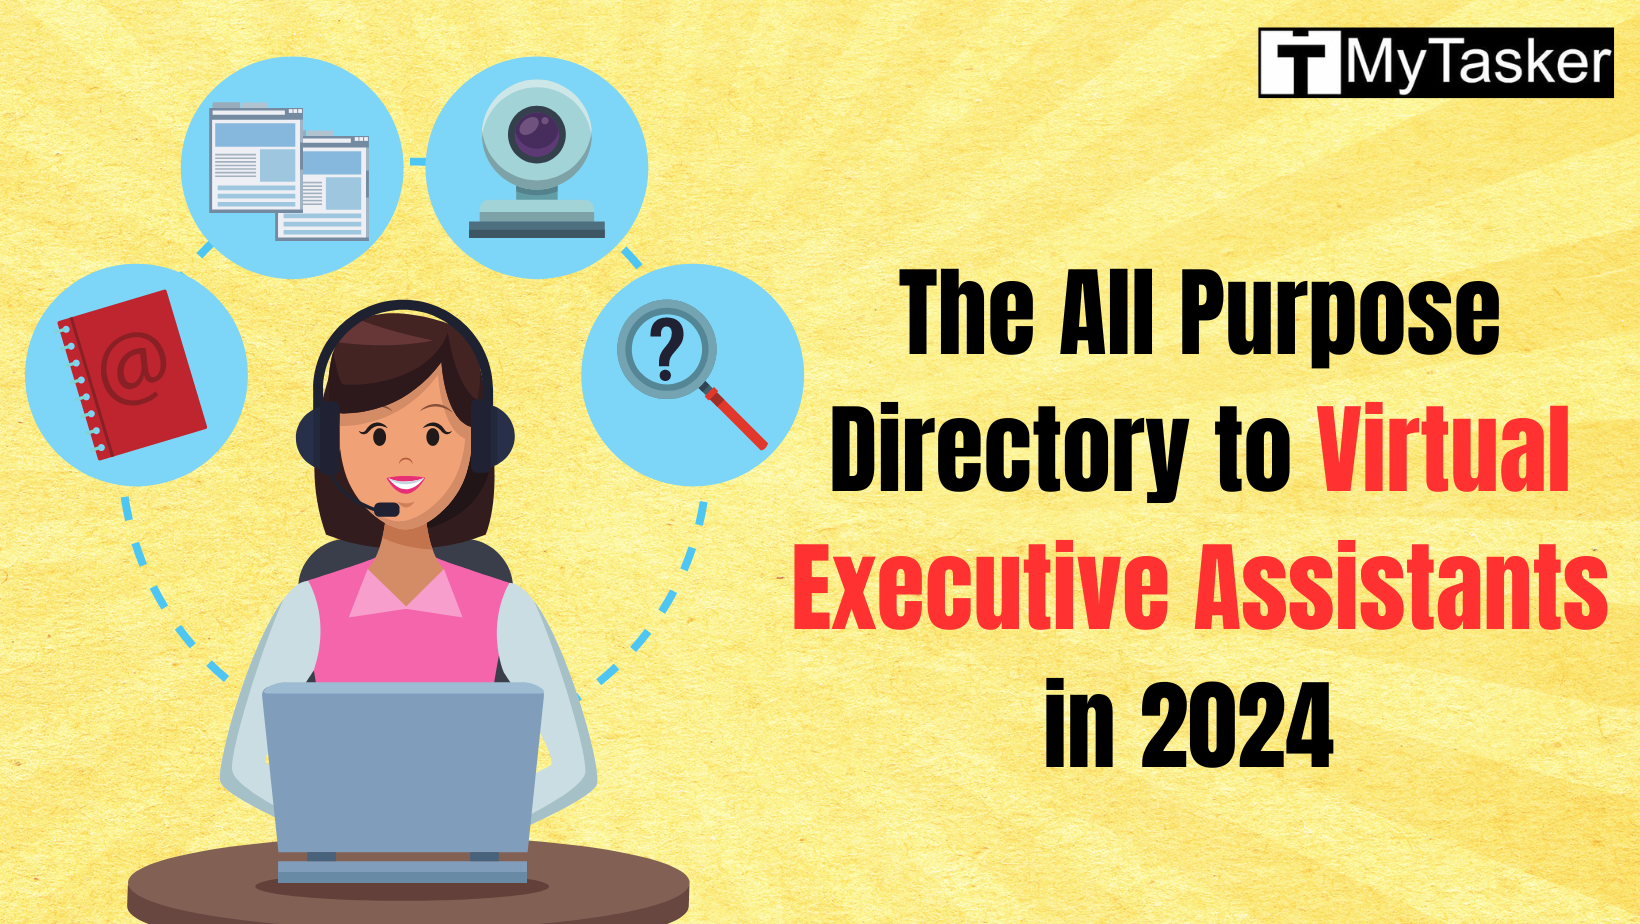 The All Purpose Directory to Virtual Executive Assistants in 2024